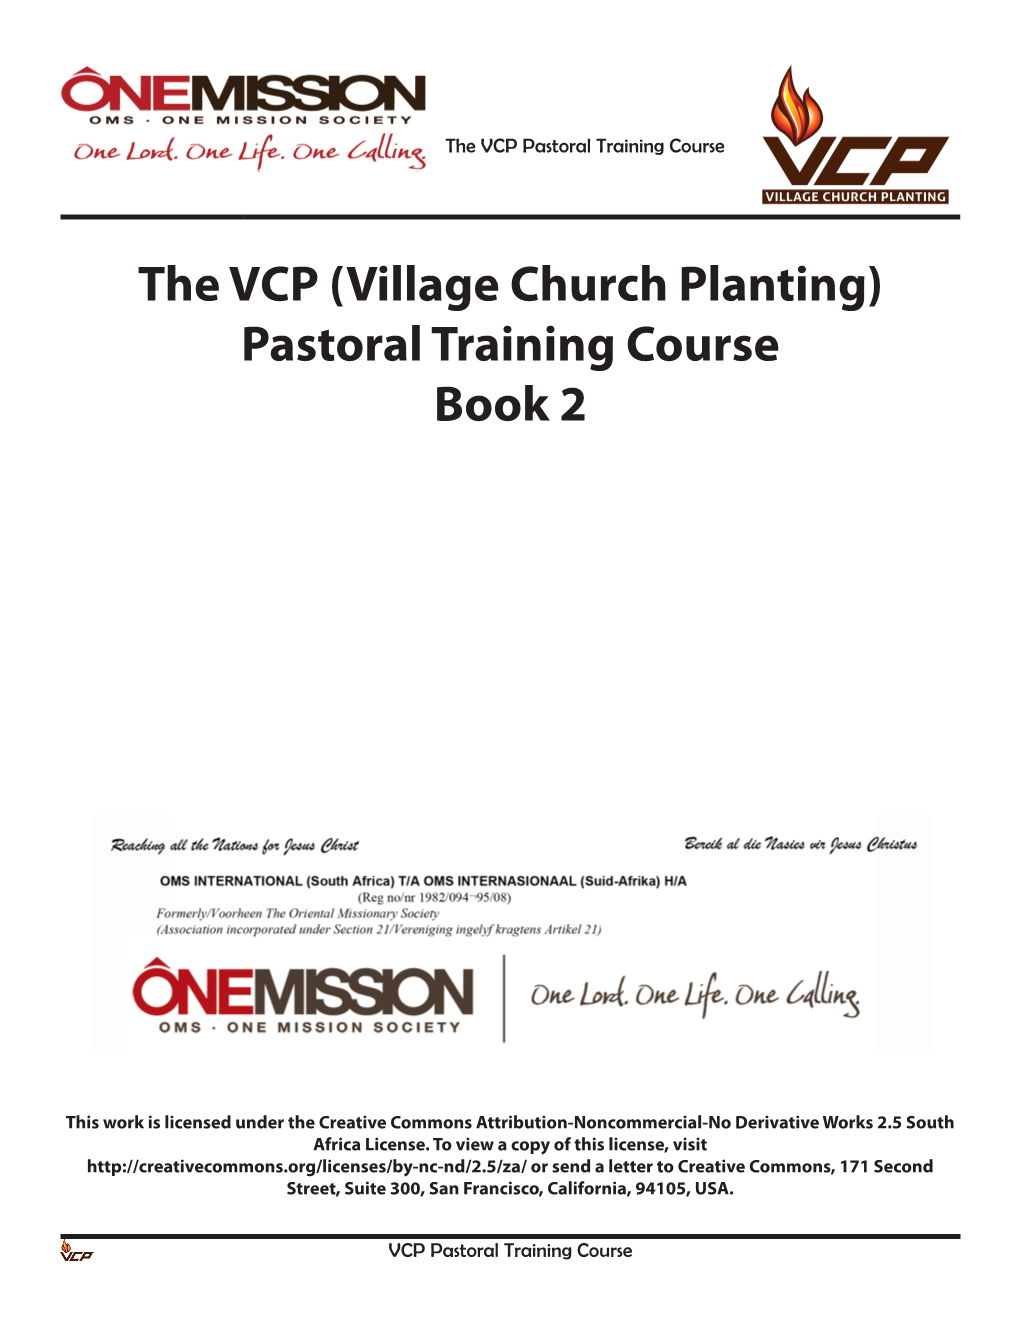 The VCP (Village Church Planting) Pastoral Training Course Book 2